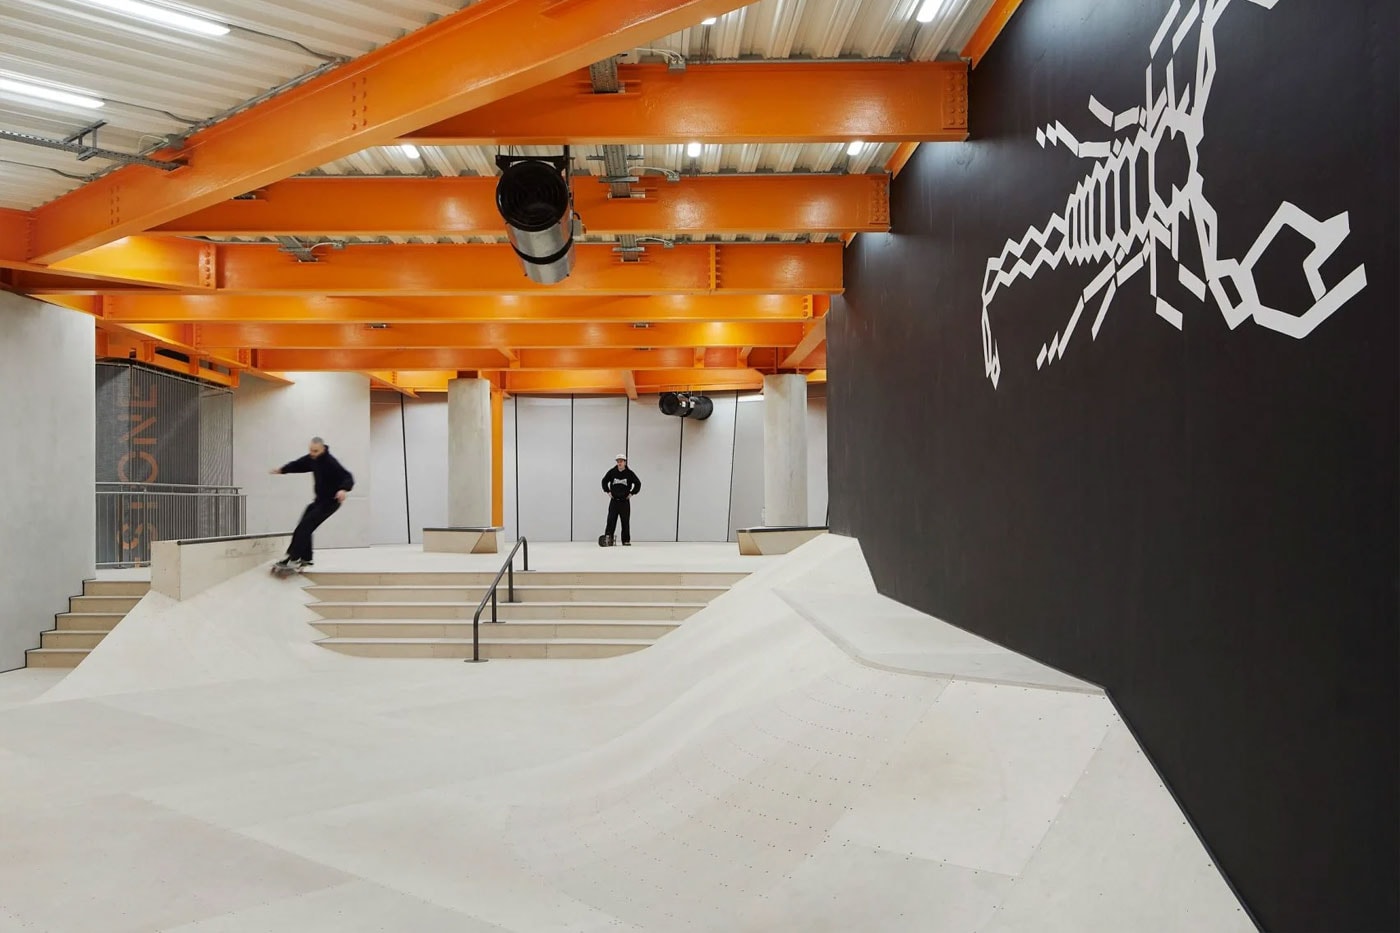 Hollaway Studio Designs the World's First Multi Floor Skatepark climbing wall three stories adrenaline building boxing gym cafe space central hub for youth 